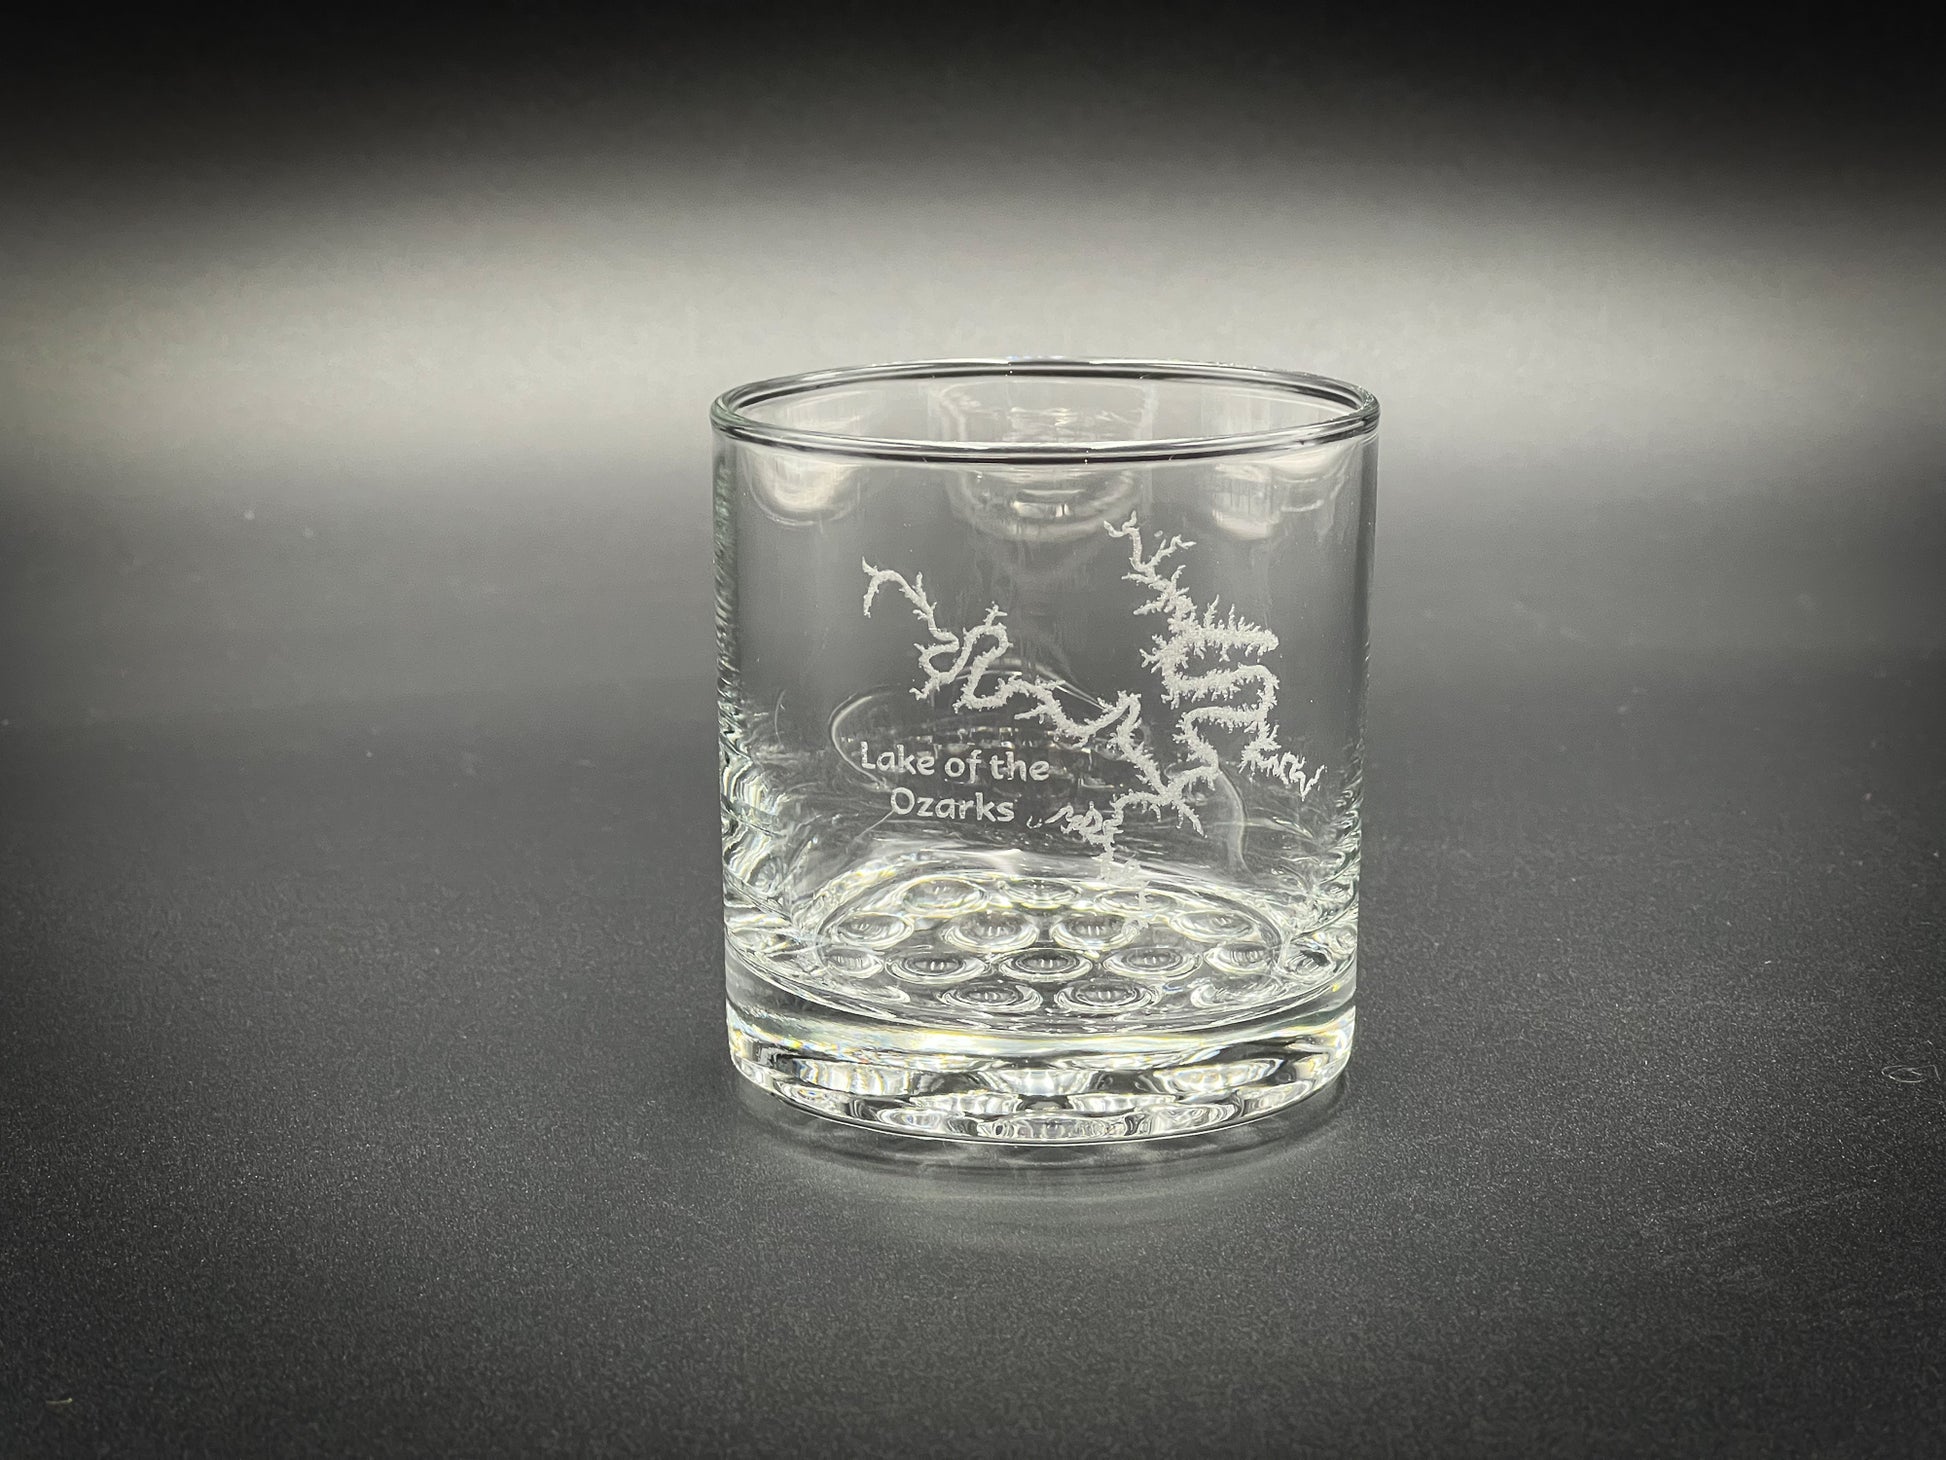 a glass with a design on it sitting on a table